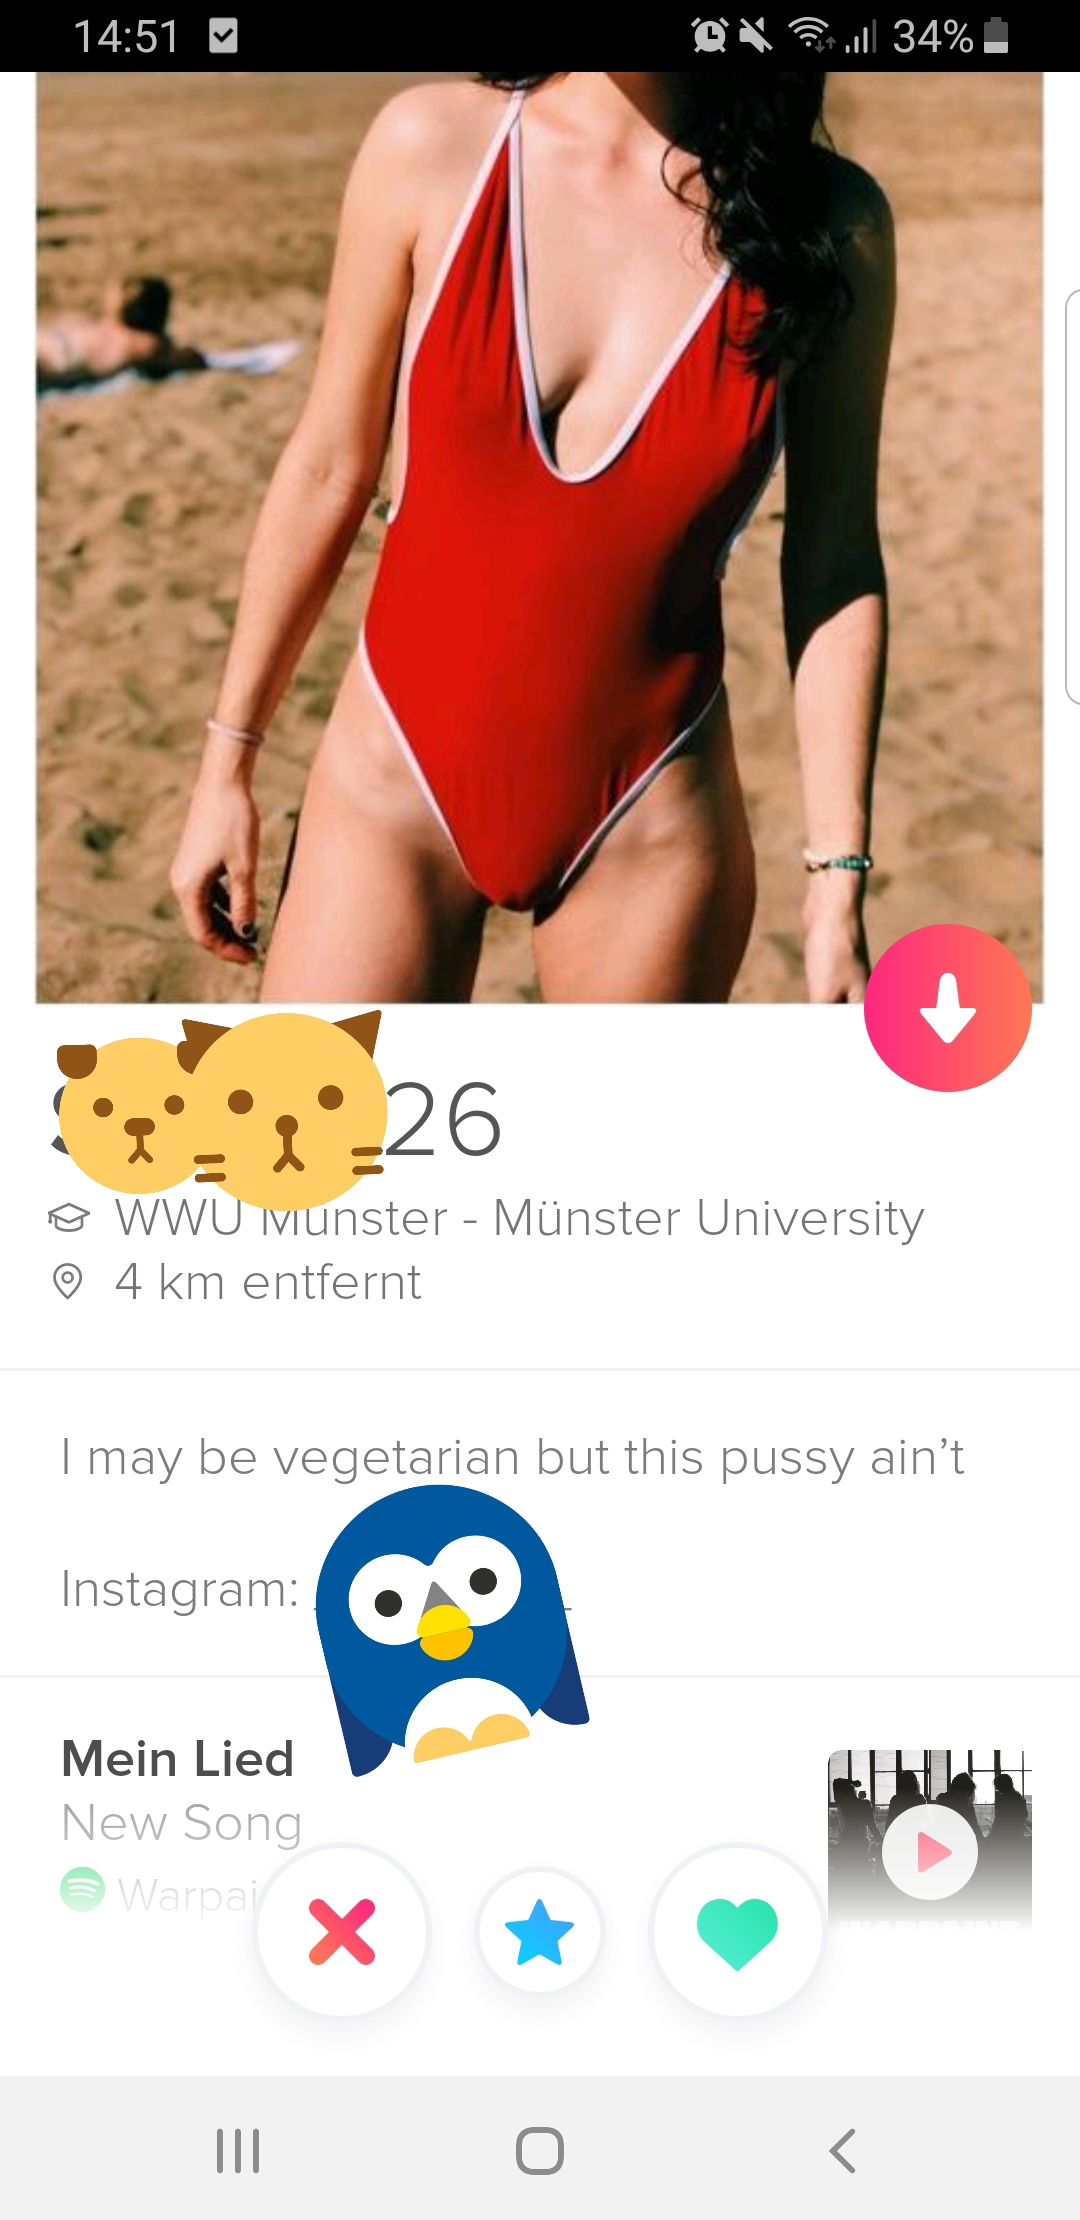 tinder - bikini - Oxs 34%. 1.26 Wwu munster Mnster University @ 4 km entfemt I may be vegetarian but this pussy ain't Instagram Mein Lied New Song